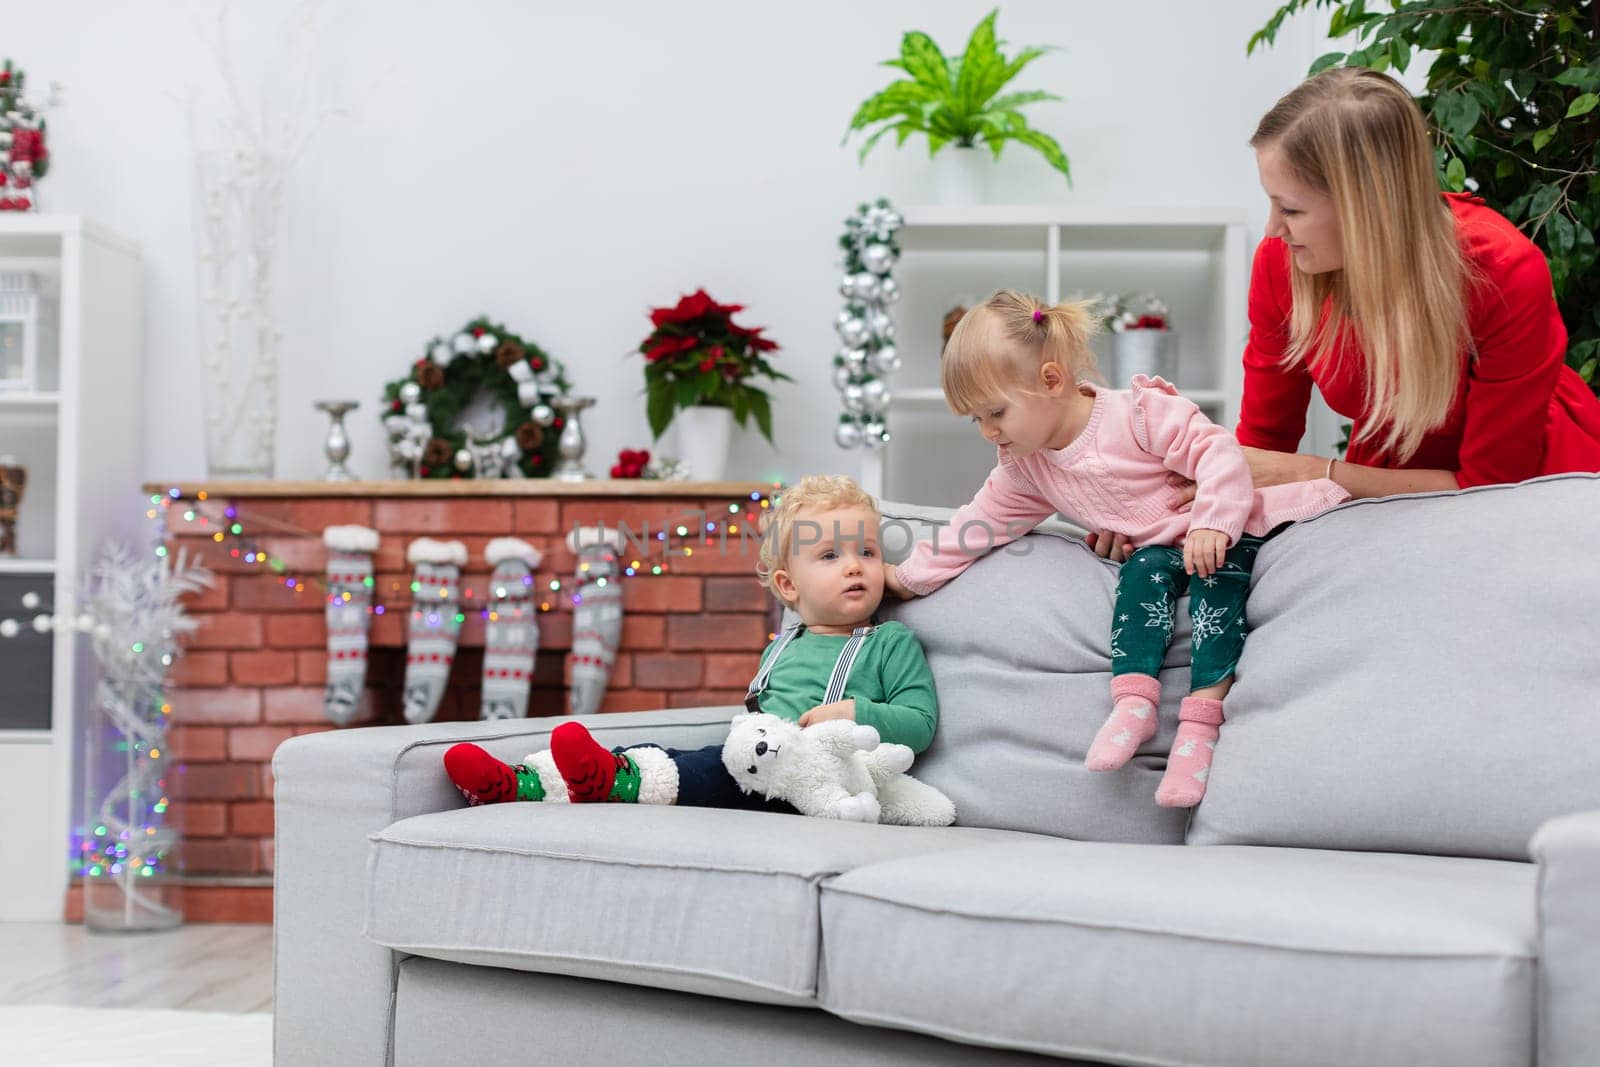 A little boy sits on a gray couch. A girl stands behind the boy and extends her hand toward him. Behind the couch stands a woman in a red dress. The mother is supporting her daughter to keep her from falling.